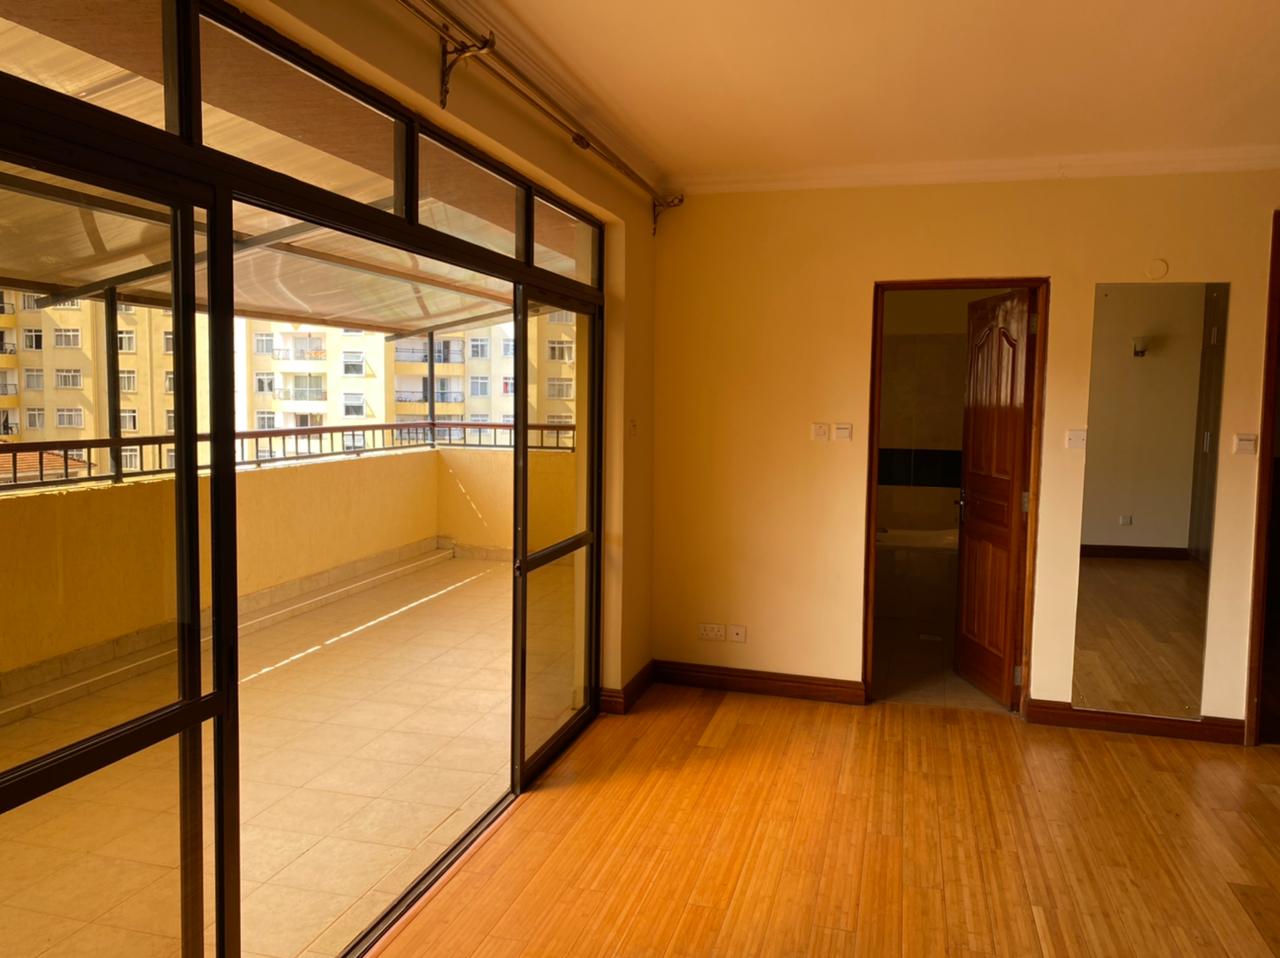 4 Bedroom All Ensuite Apartment for Rent in Kilimani at Ksh200k with exciting amenities  (15)